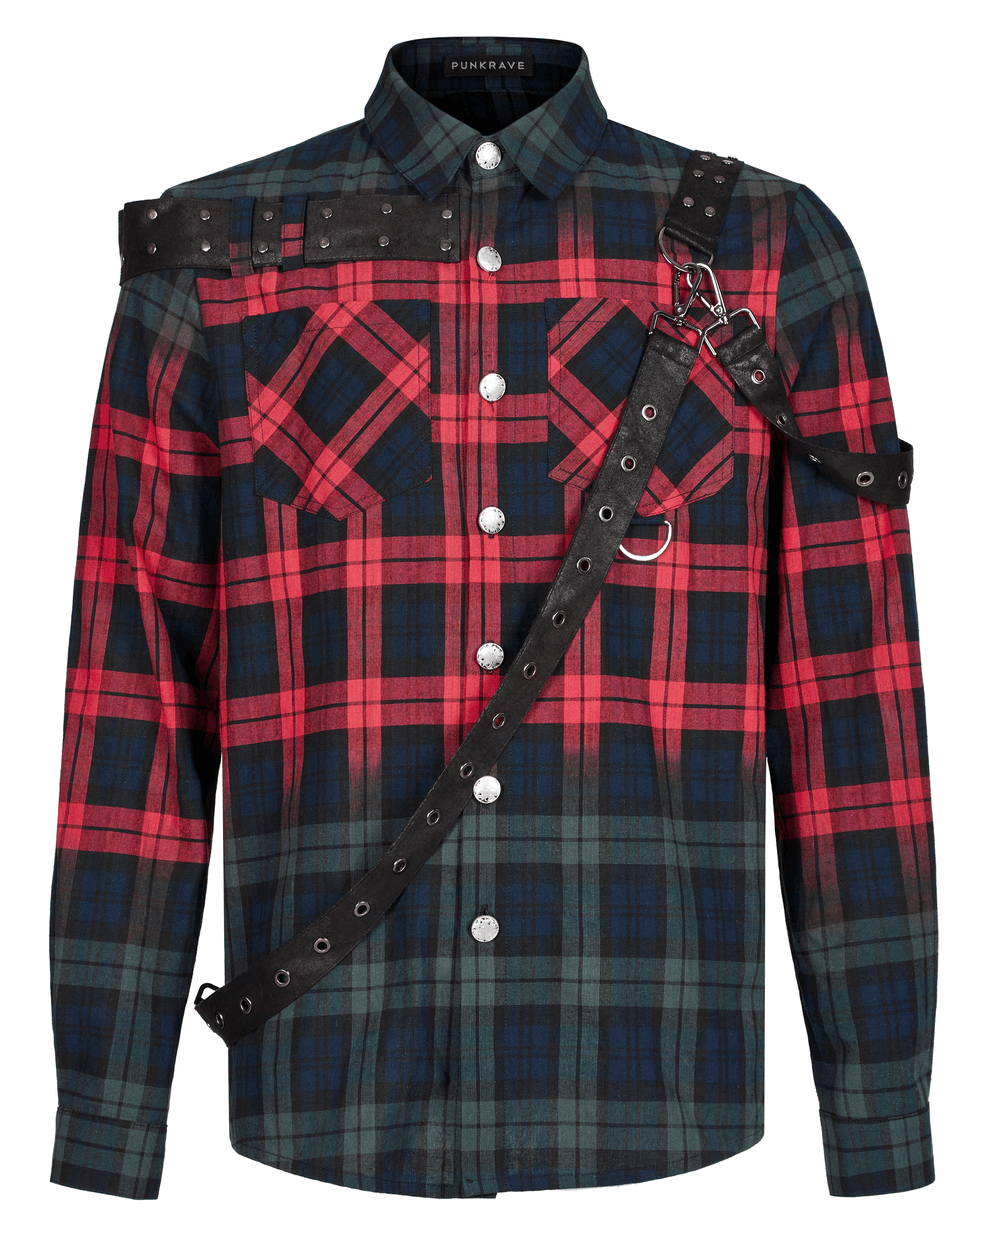 Men's Punk Plaid Shirt with Leather Accents - HARD'N'HEAVY